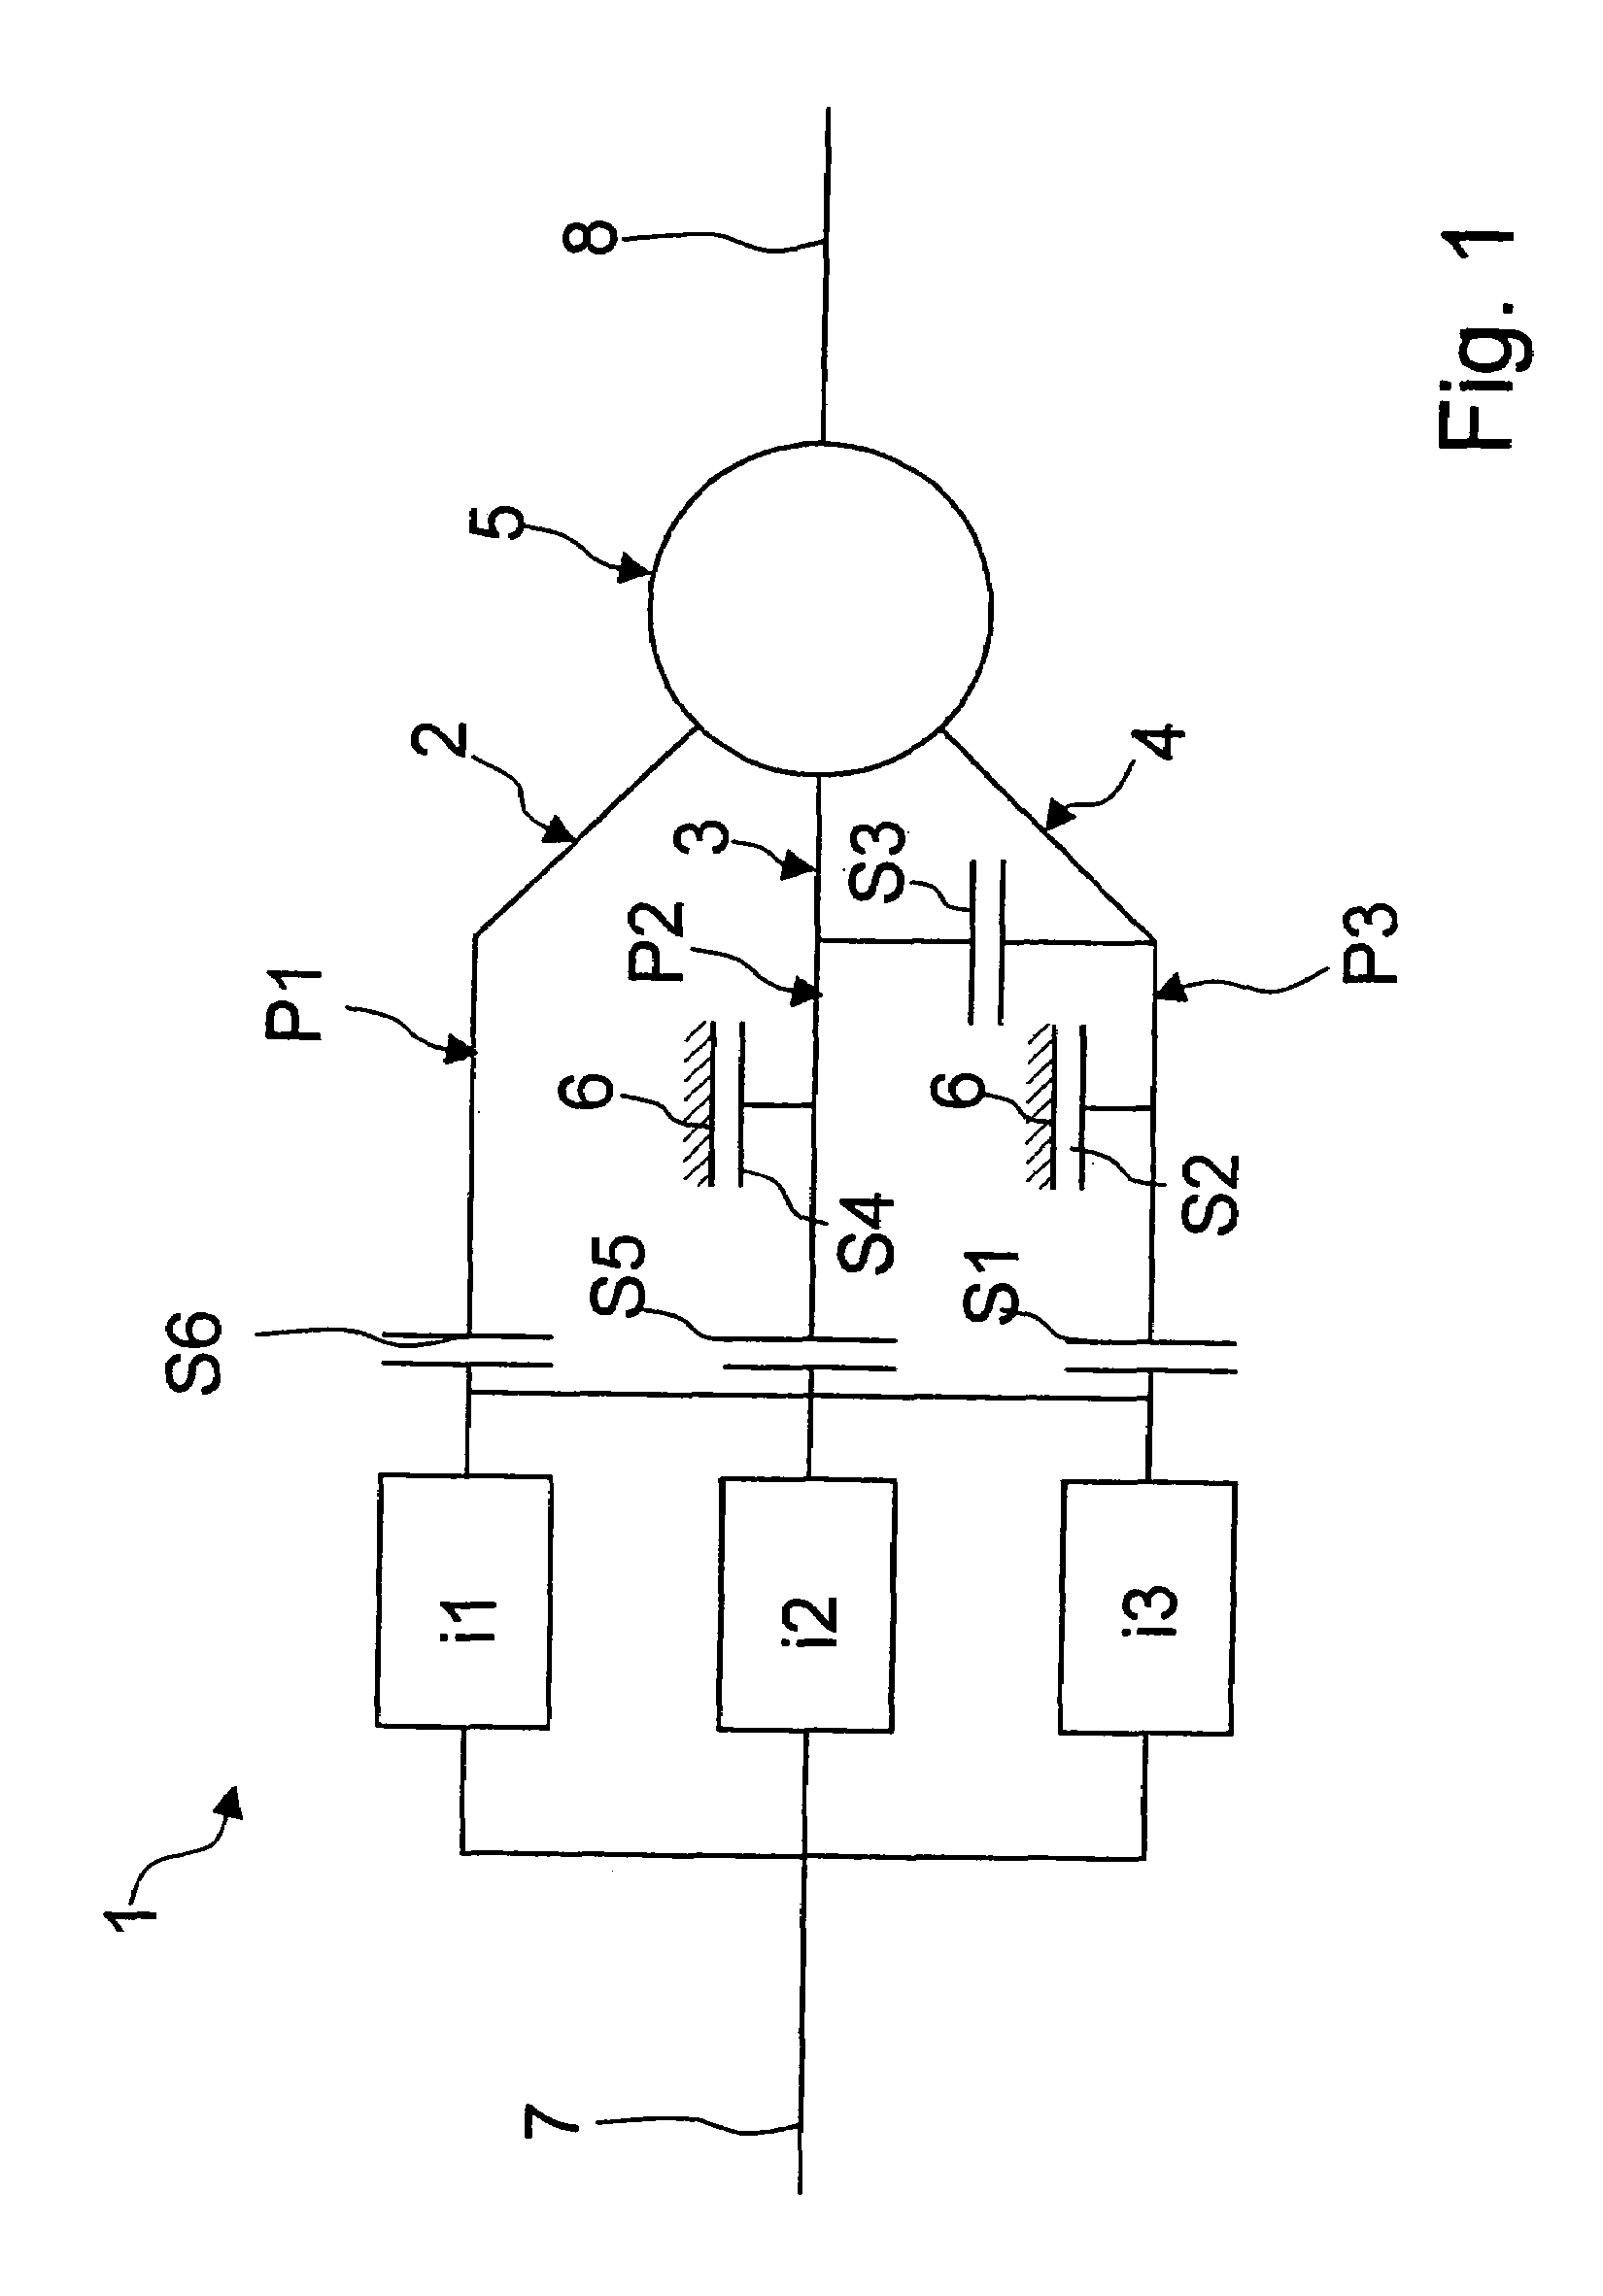 Transmission, in particular an automated power-branched multi-speed gearing